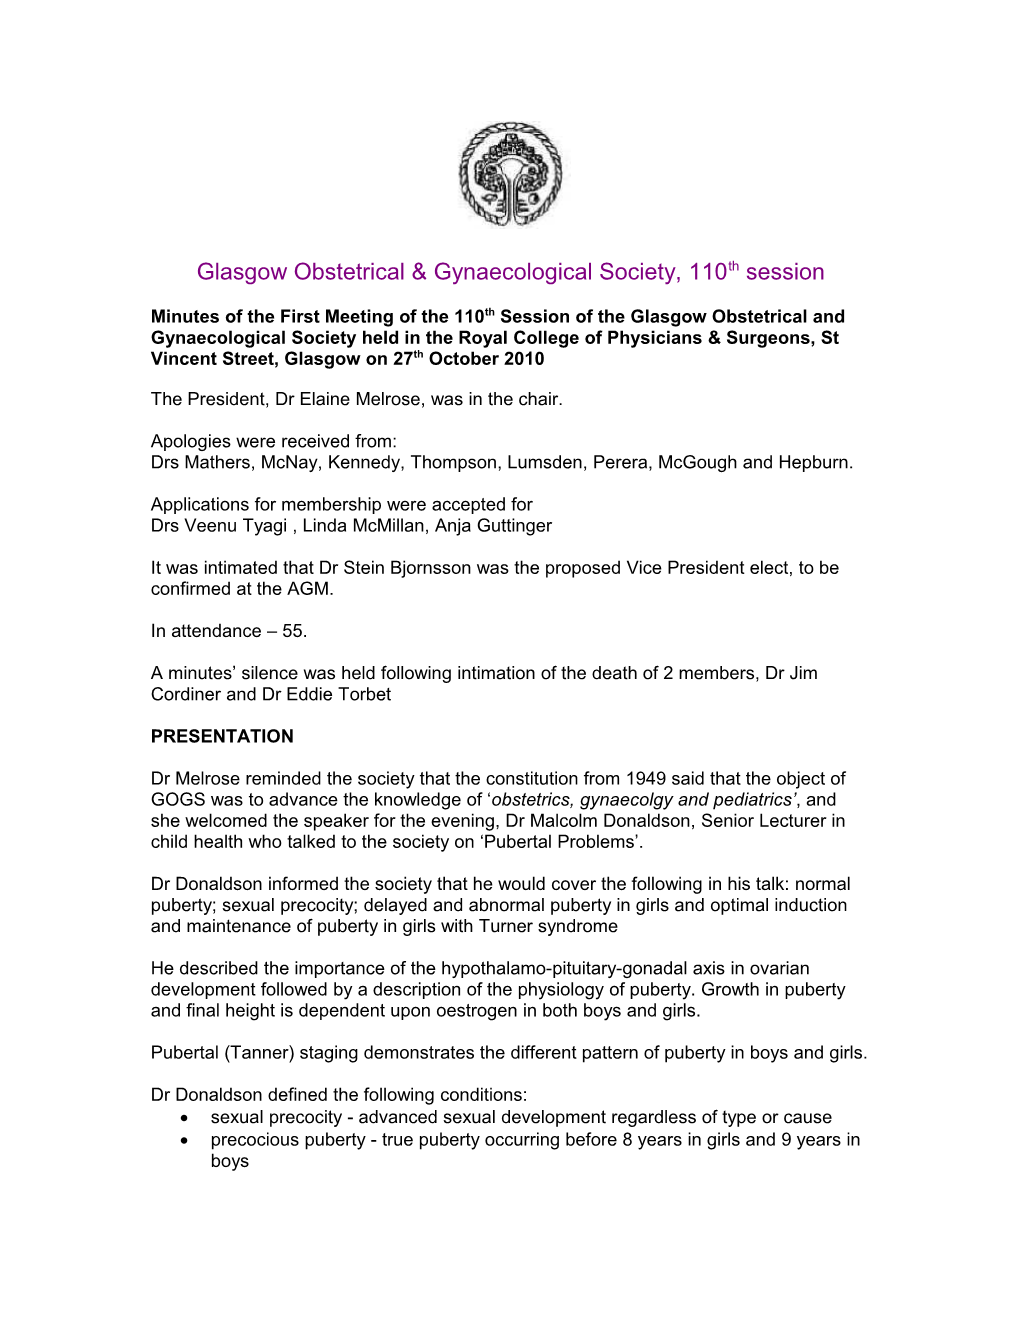 Minutes of the First Meeting of the 104Th Session of the Glasgow Obstetrical and Gynaecological